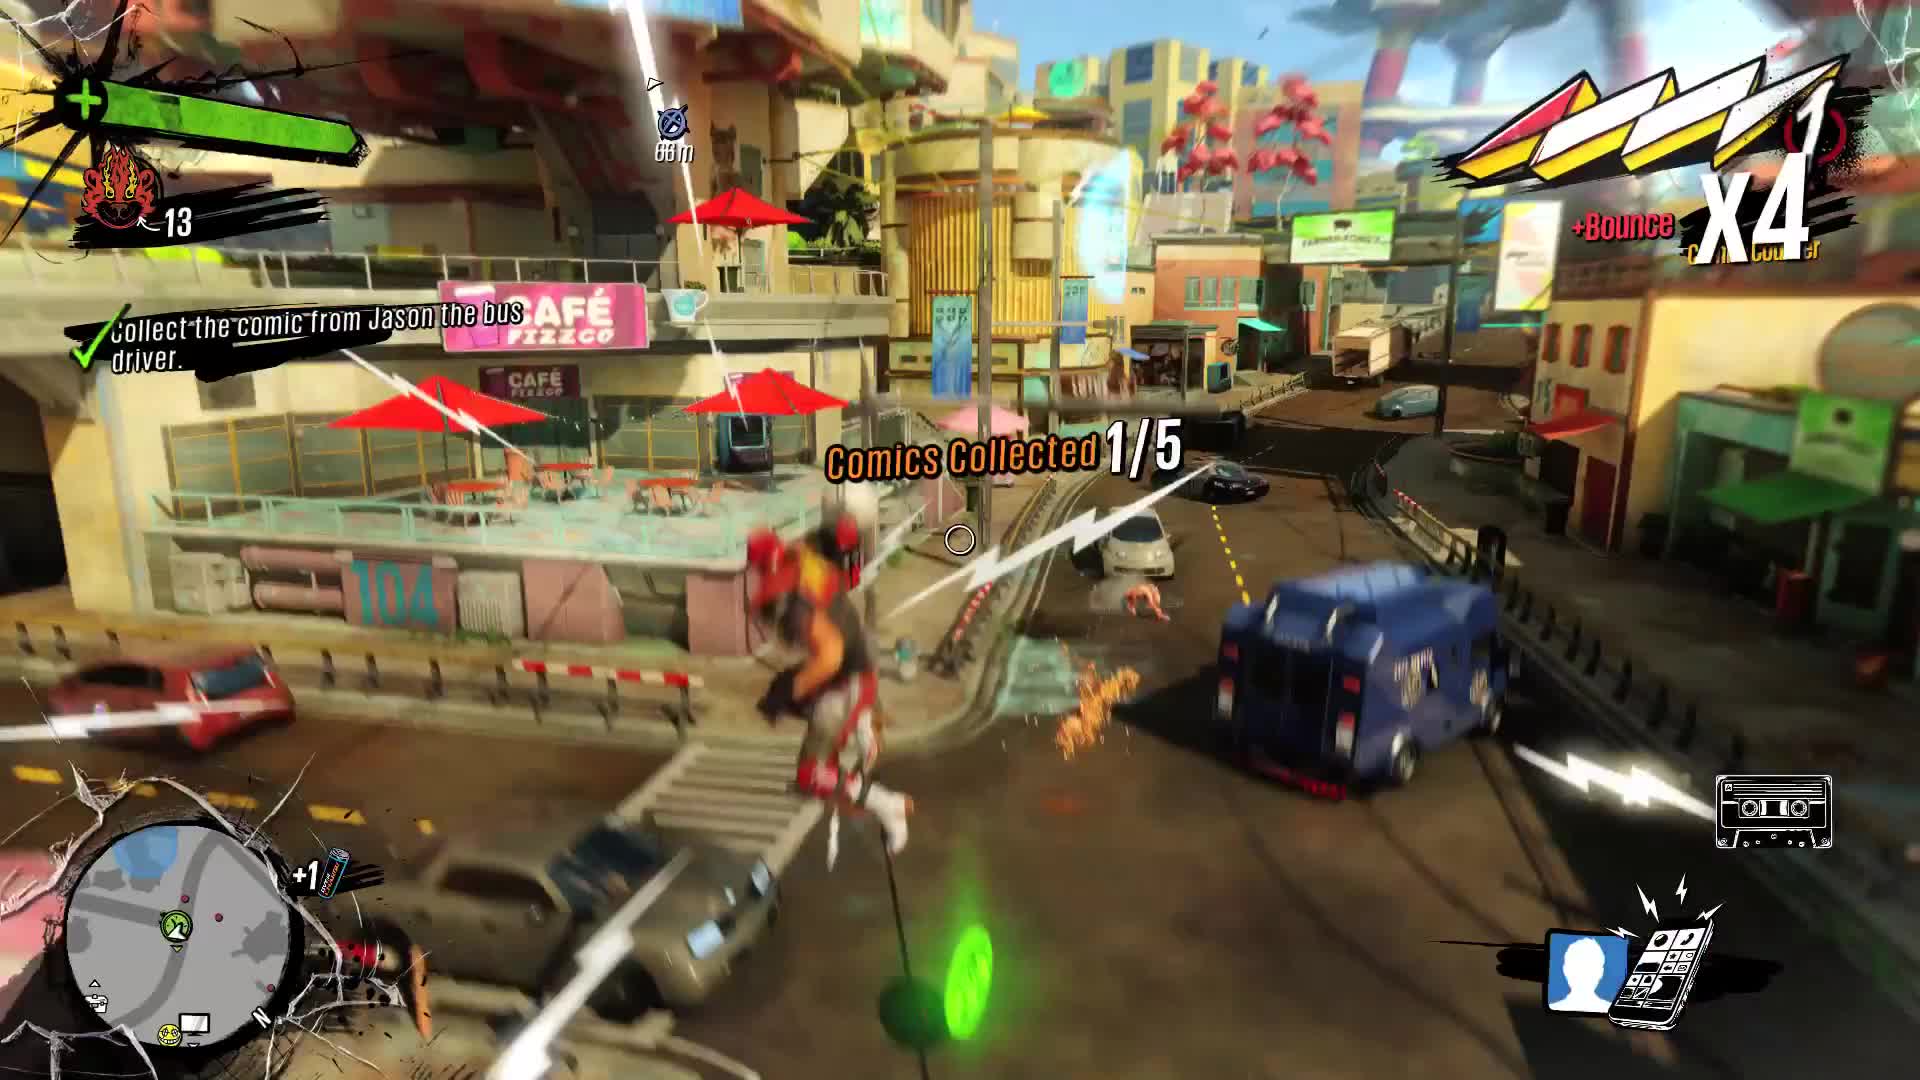 Sunset overdrive TV - Challenges